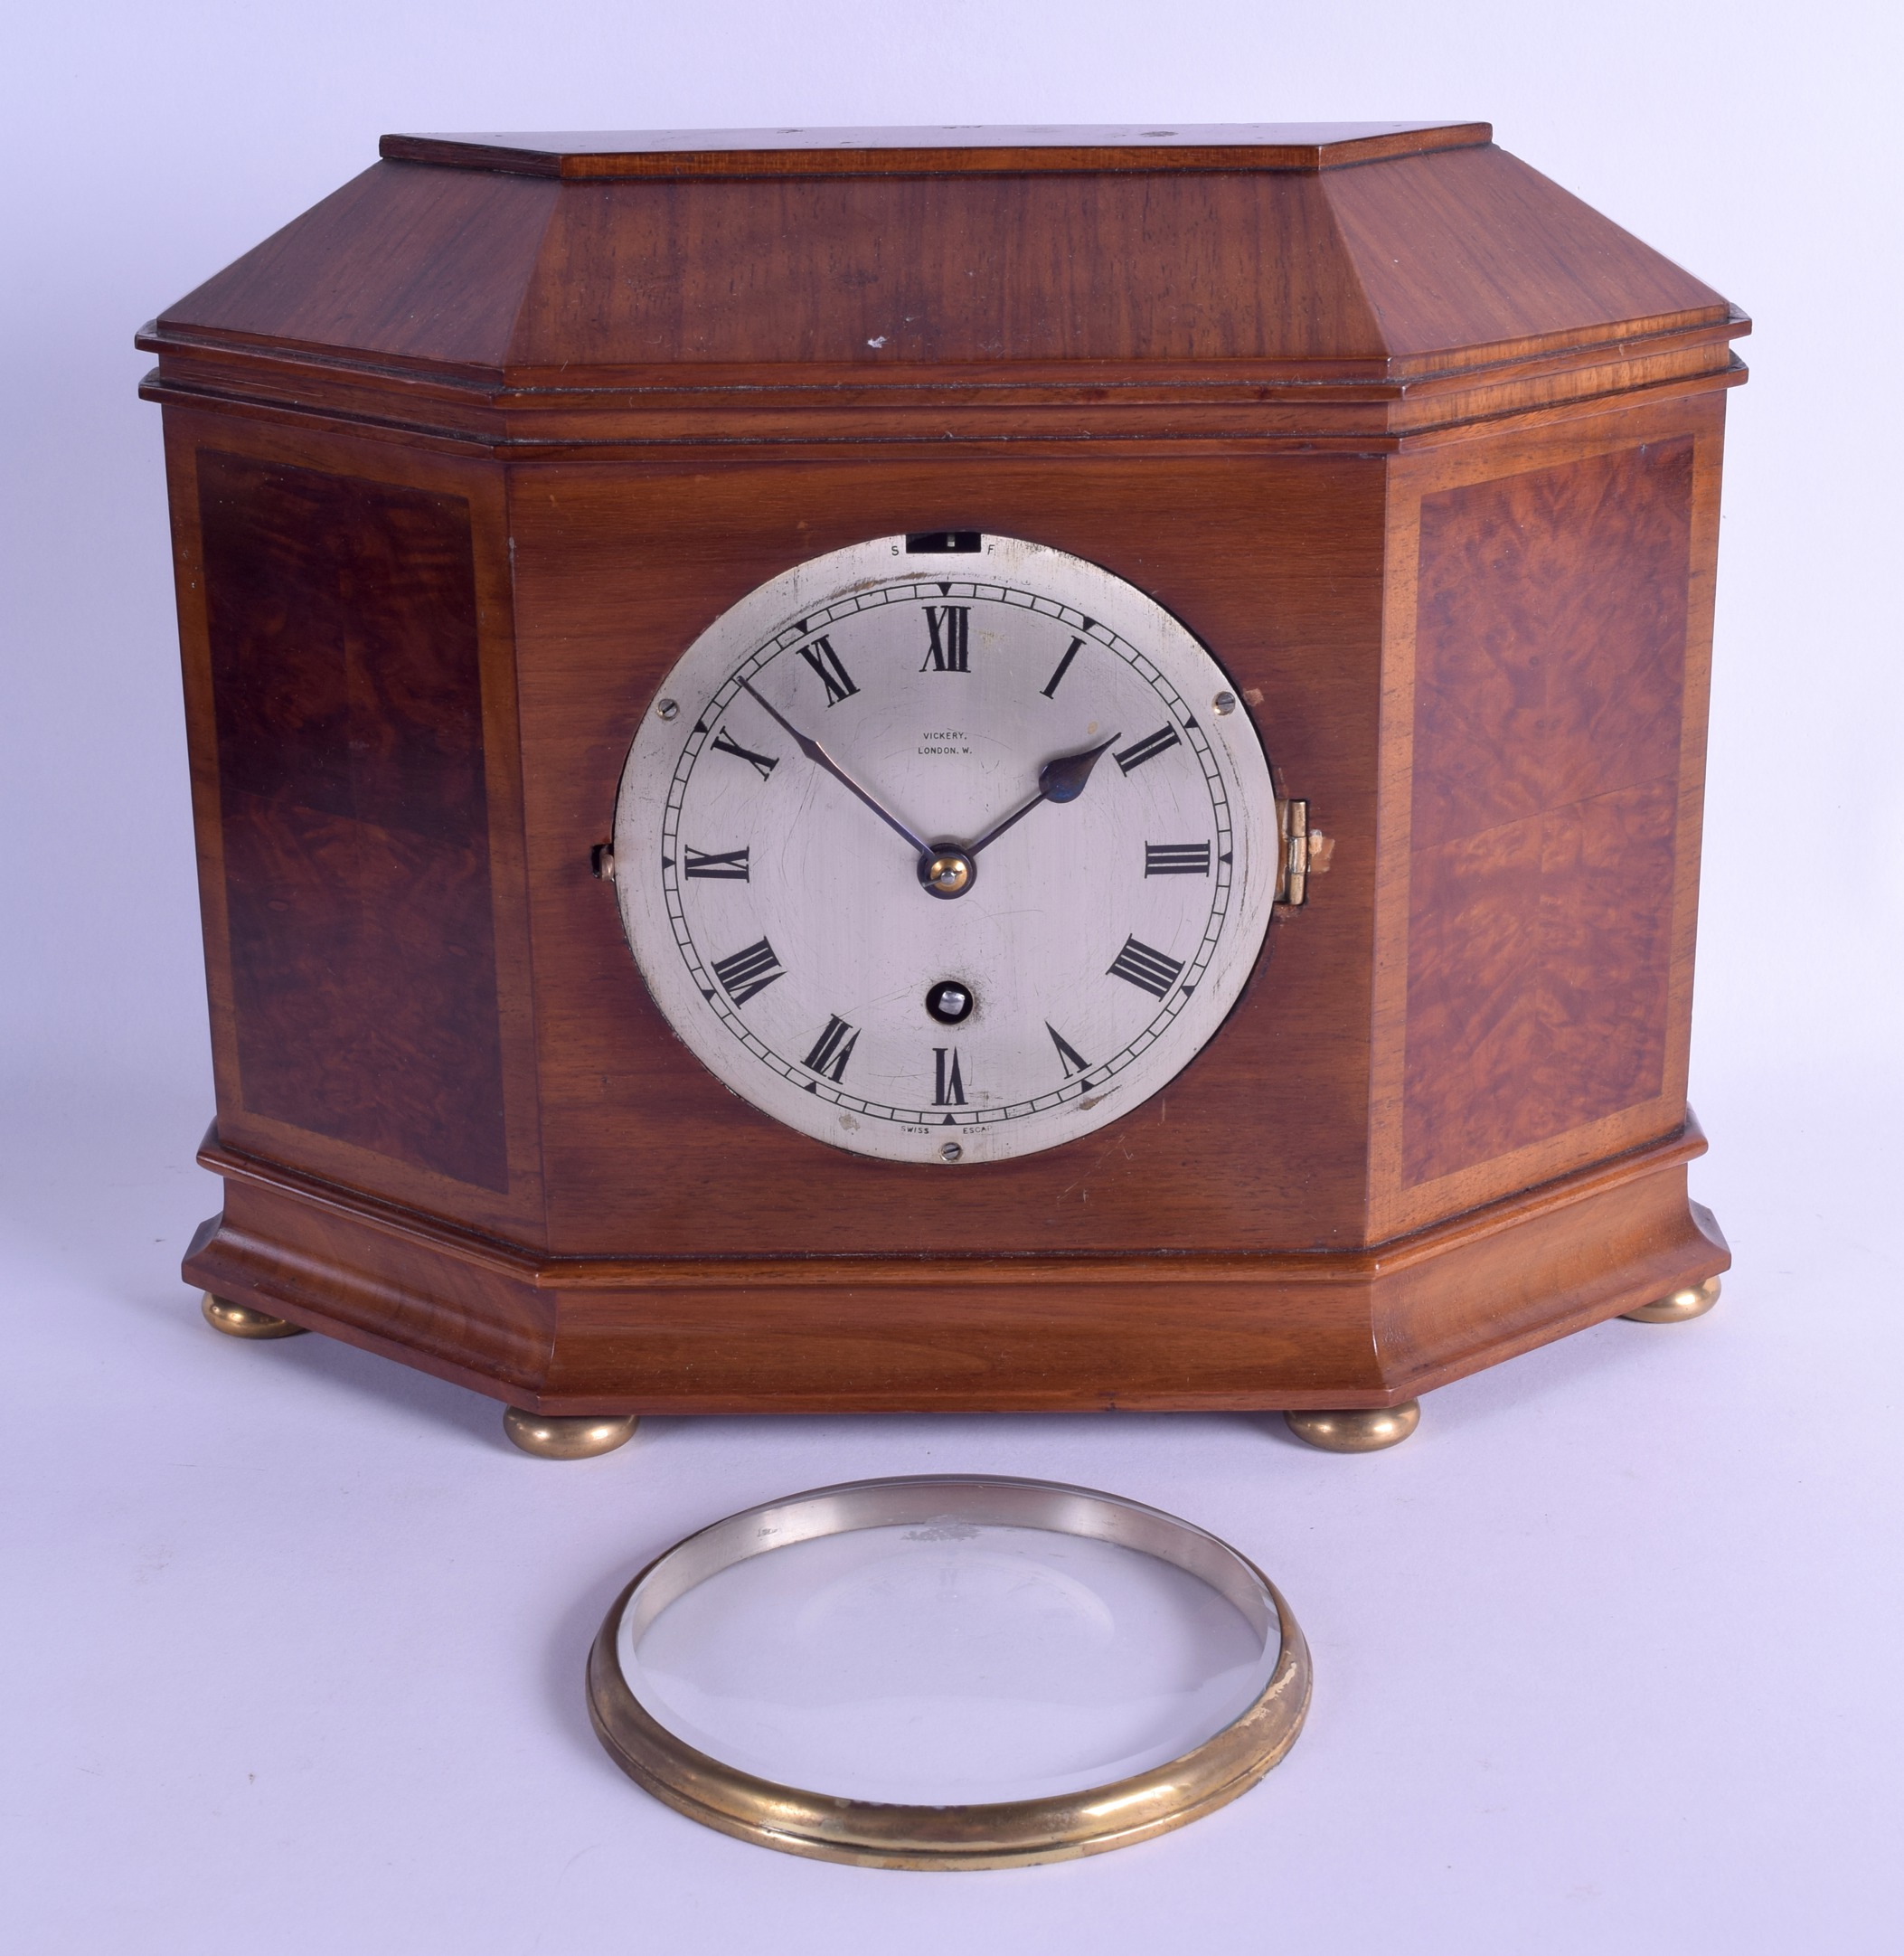 AN ANTIQUE VICKERY OF LONDON MAHOGANY AND WALNUT MANTEL CLOCK with silvered dial and black numerals.